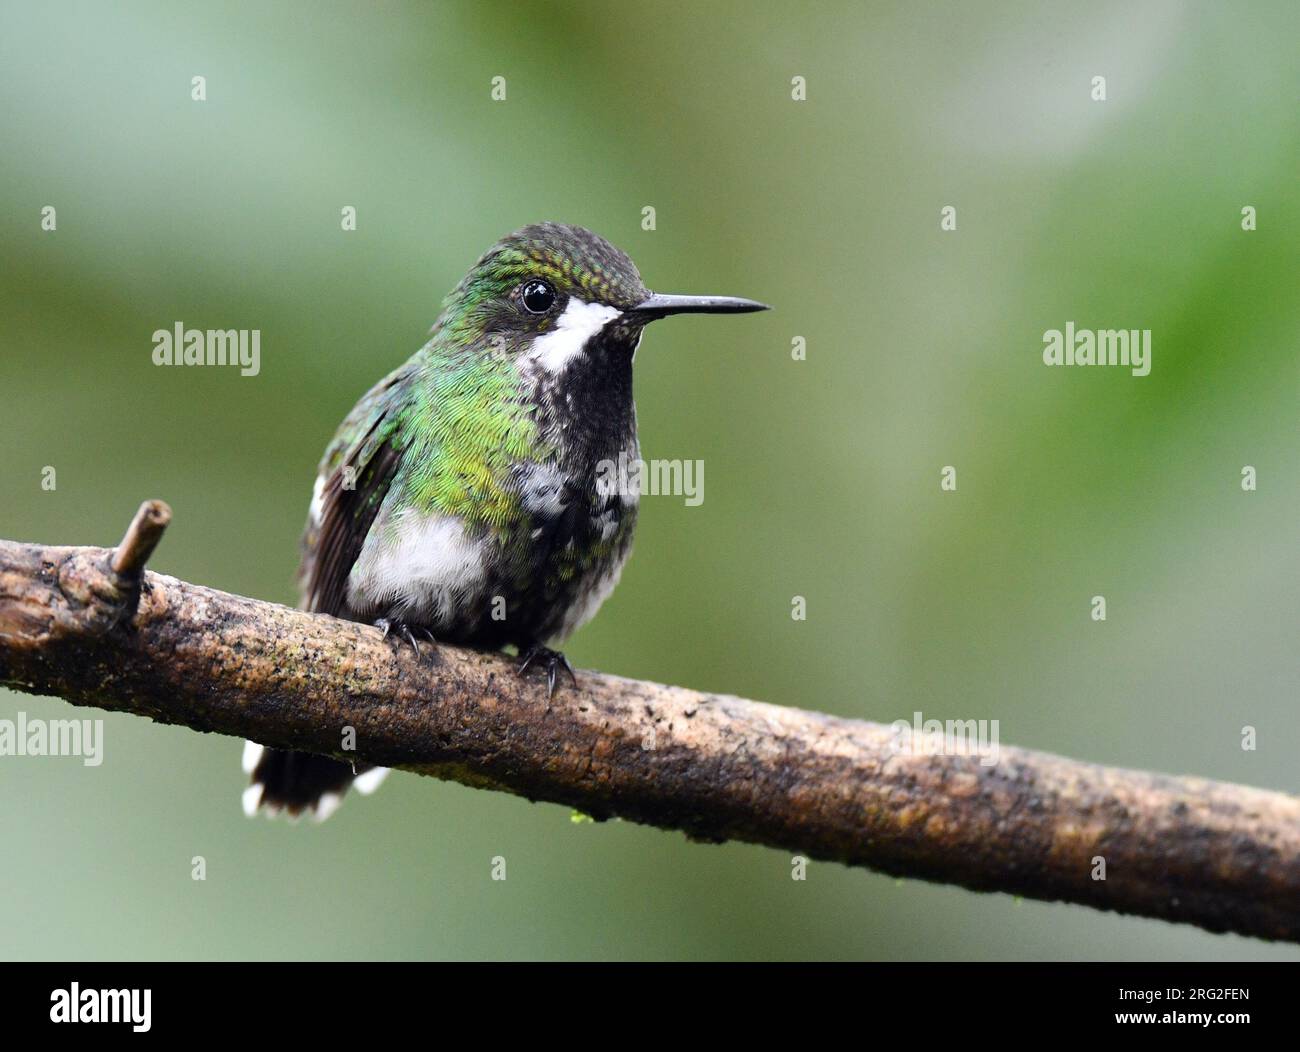 Green Thorntail (Discosura conversii) in Mashpi reserve on the western andean slope of Ecuador. Stock Photo